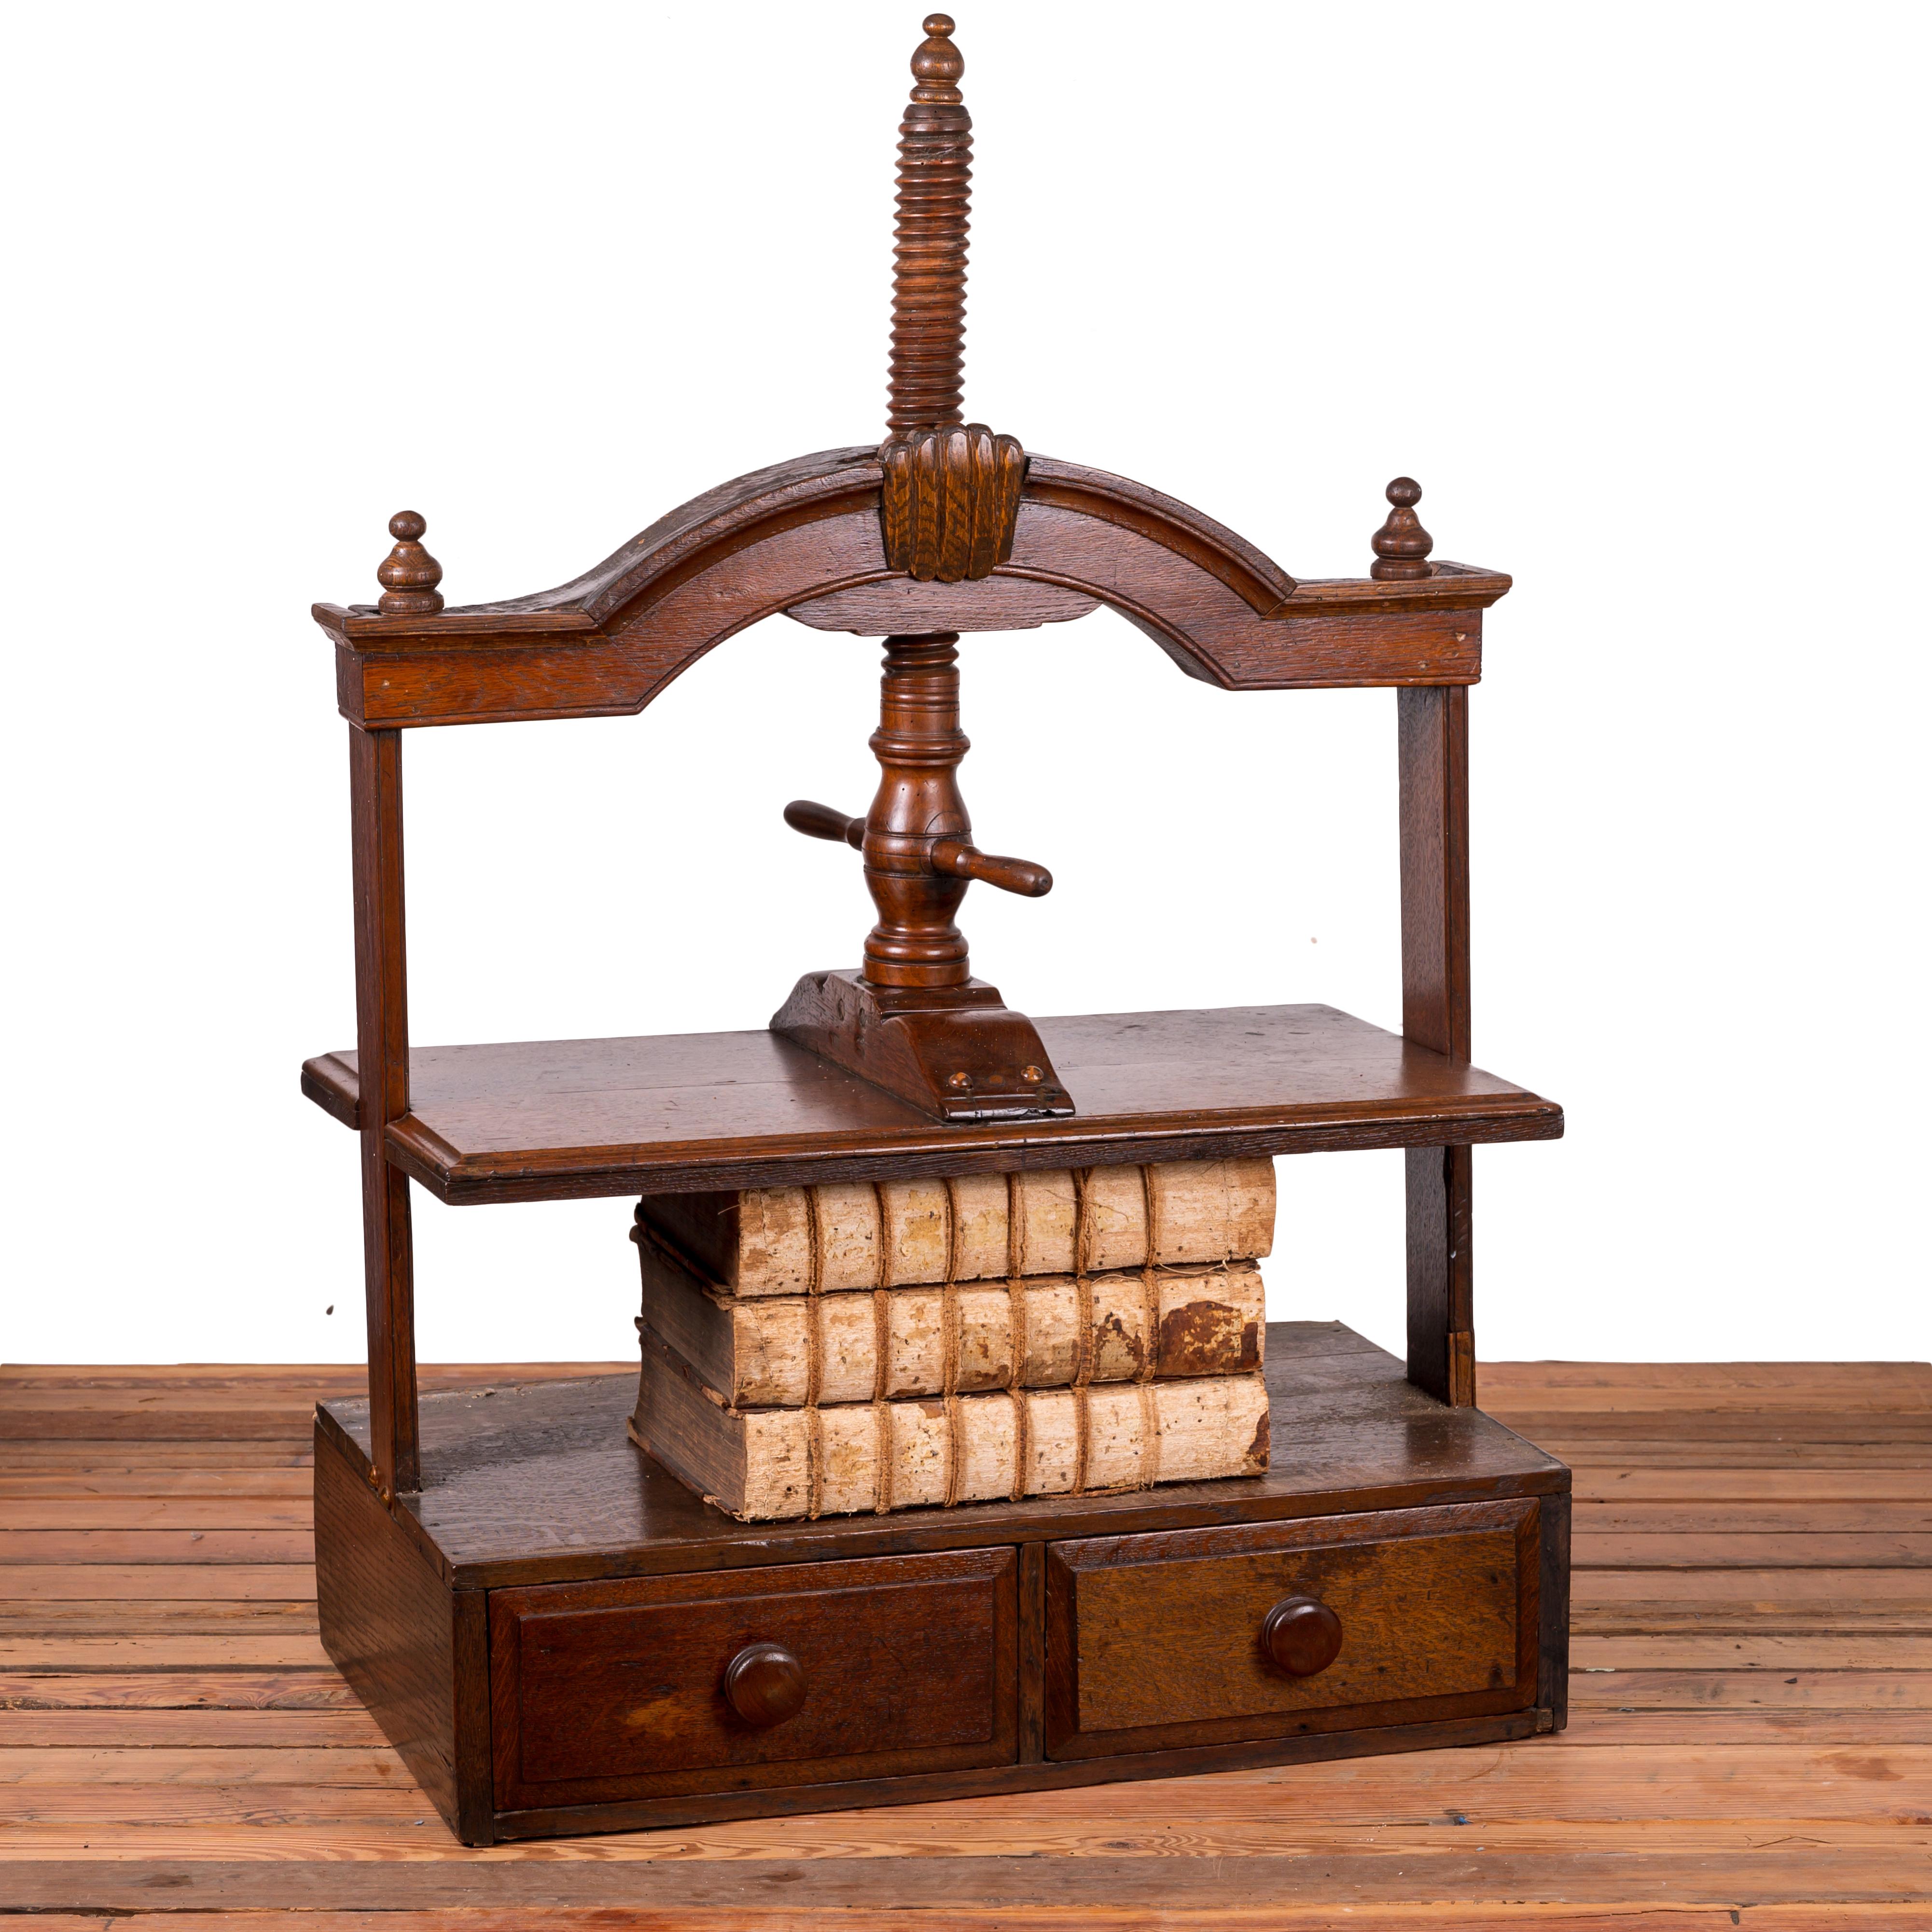 An 18th century George III oak book press with two drawers.

32 ½ inches wide by 20 inches deep by 36 inches tall

